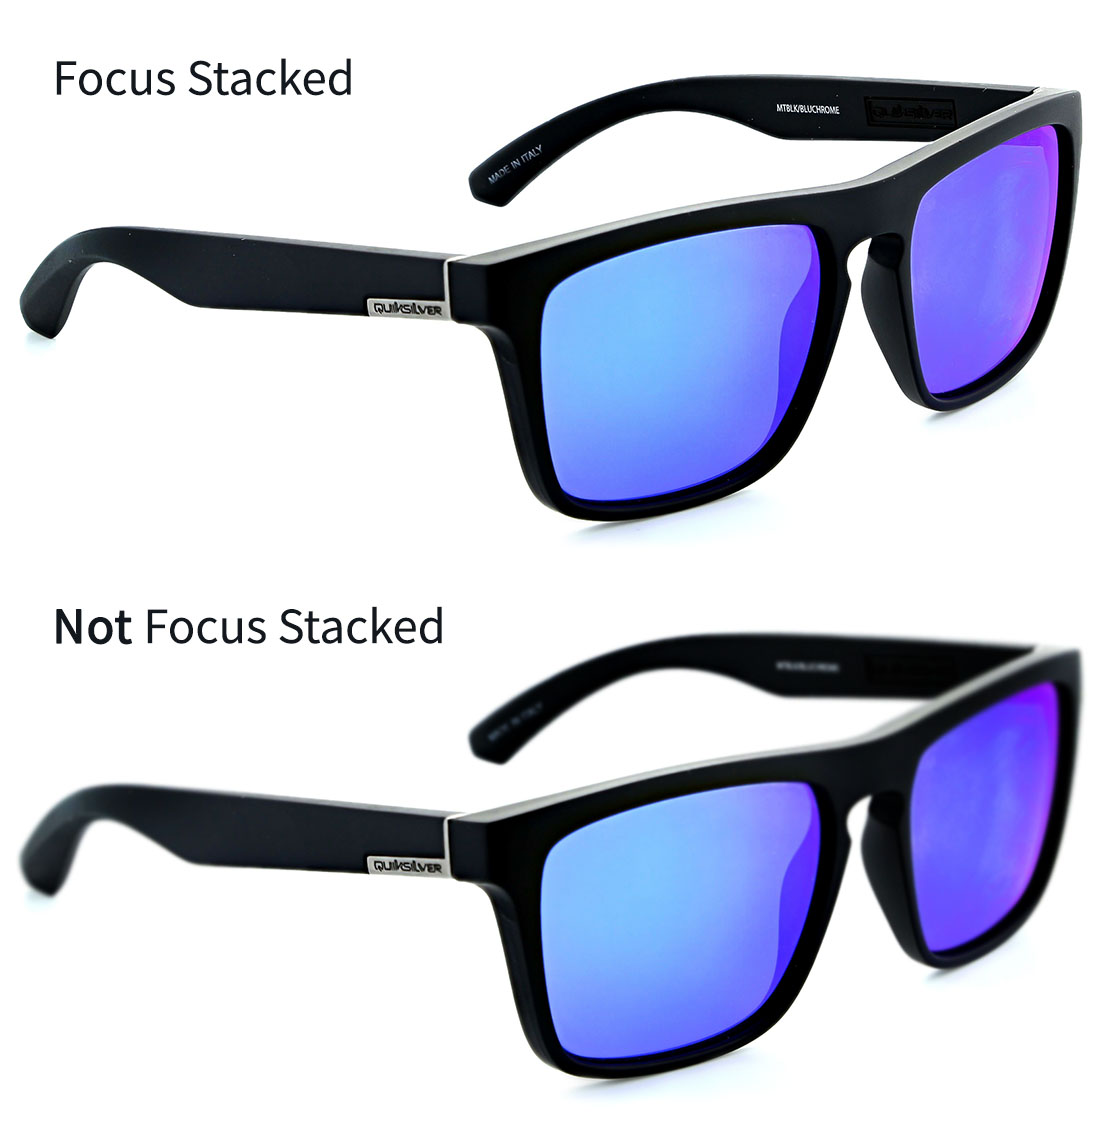 Ortery eyewear photography solution displaying an example of a software feature called Focus Stacking that allows users to obtain full image focus automatically.